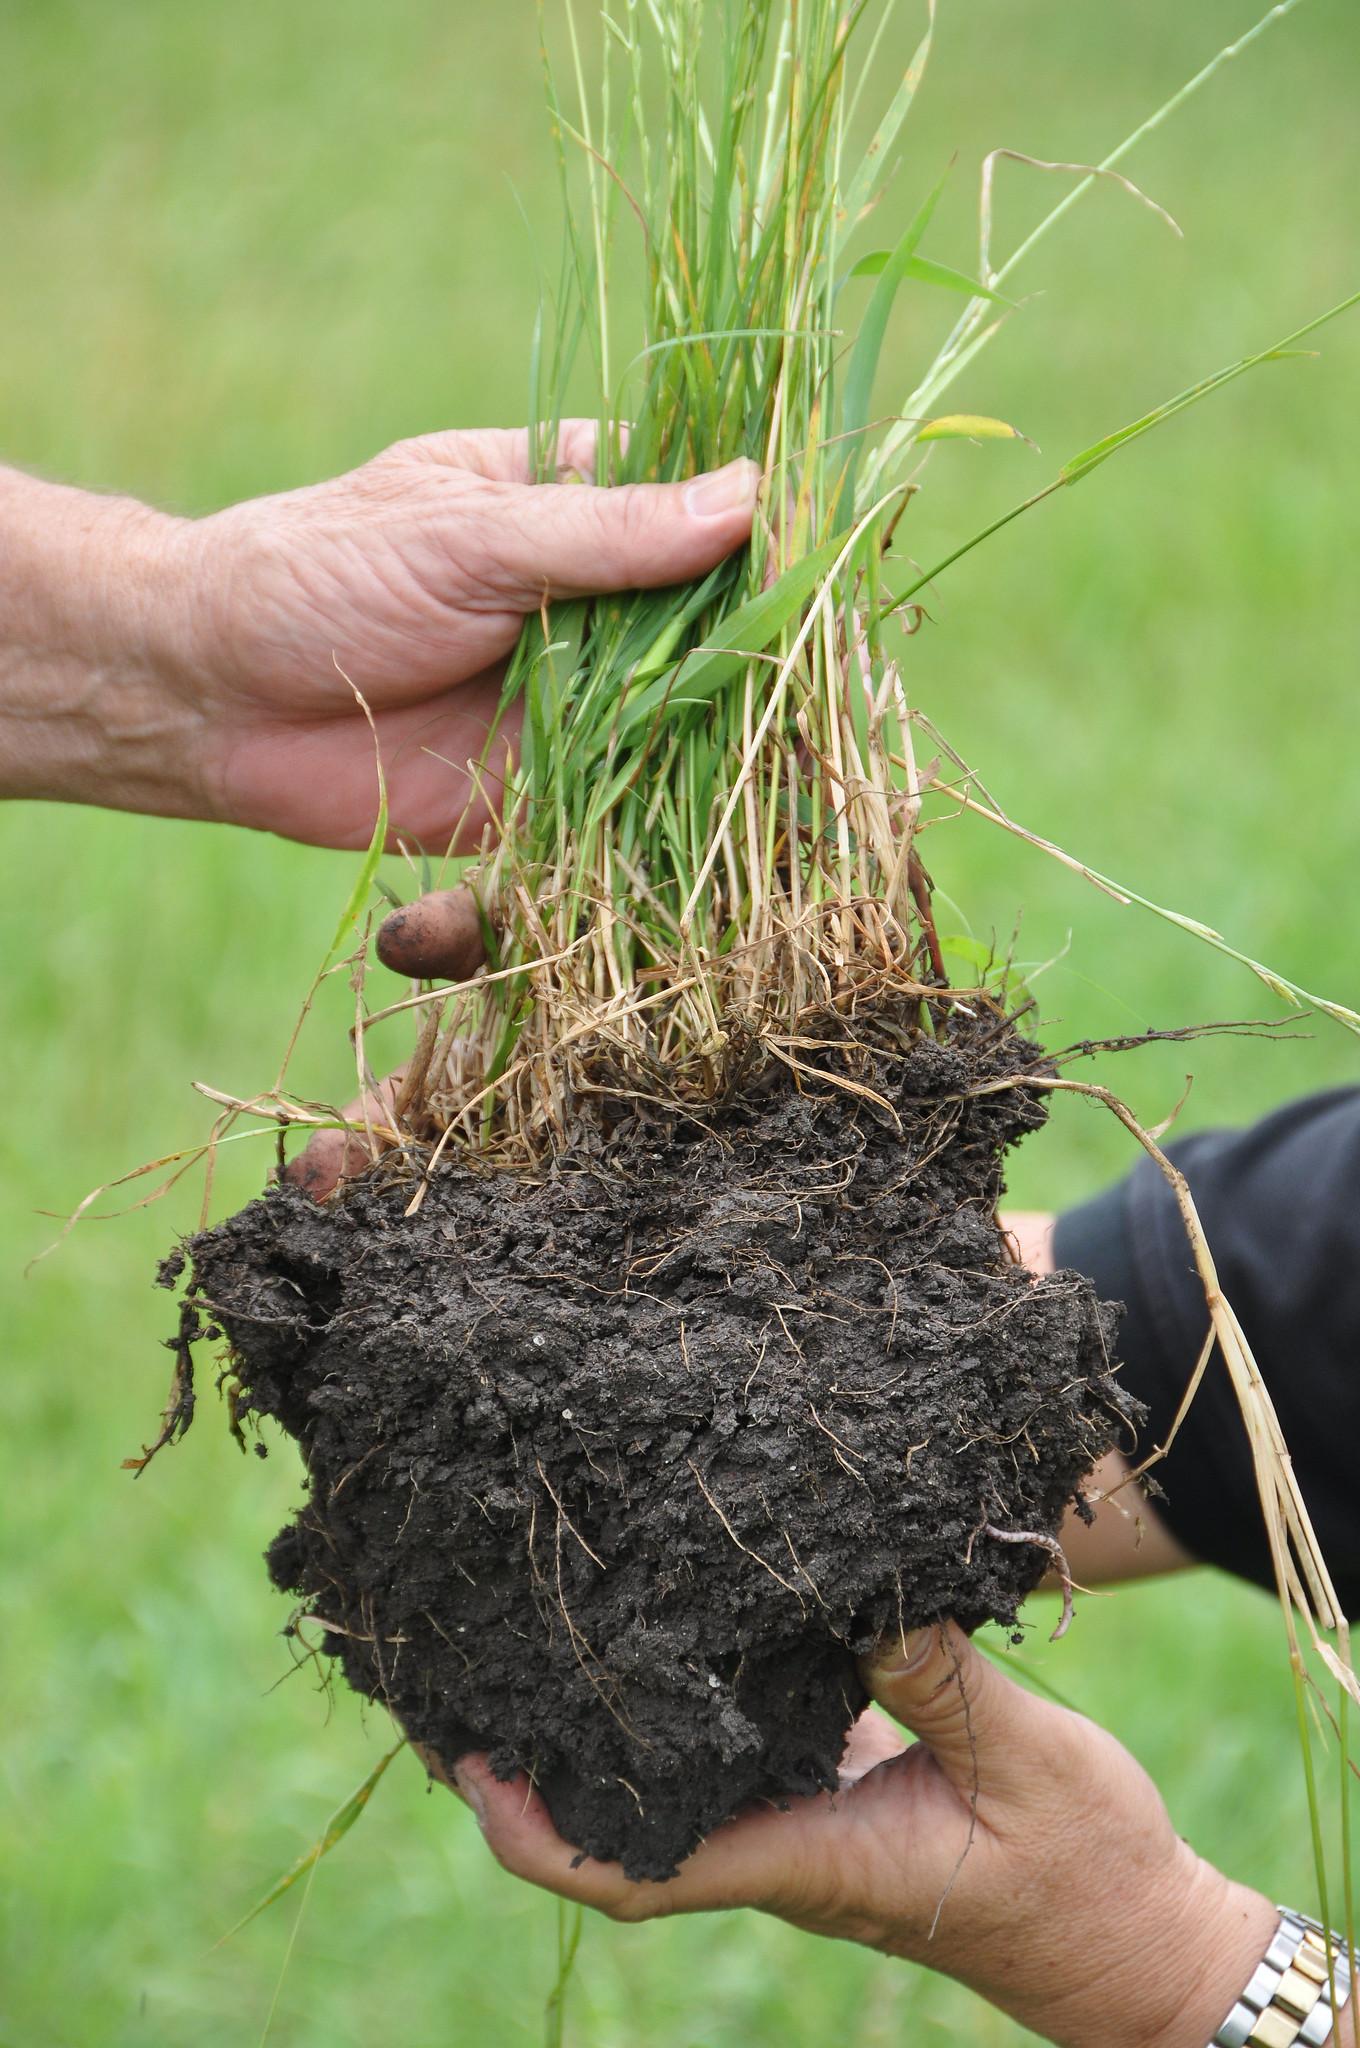 Person holding a large piece of soil with root systems and grass sprouting up